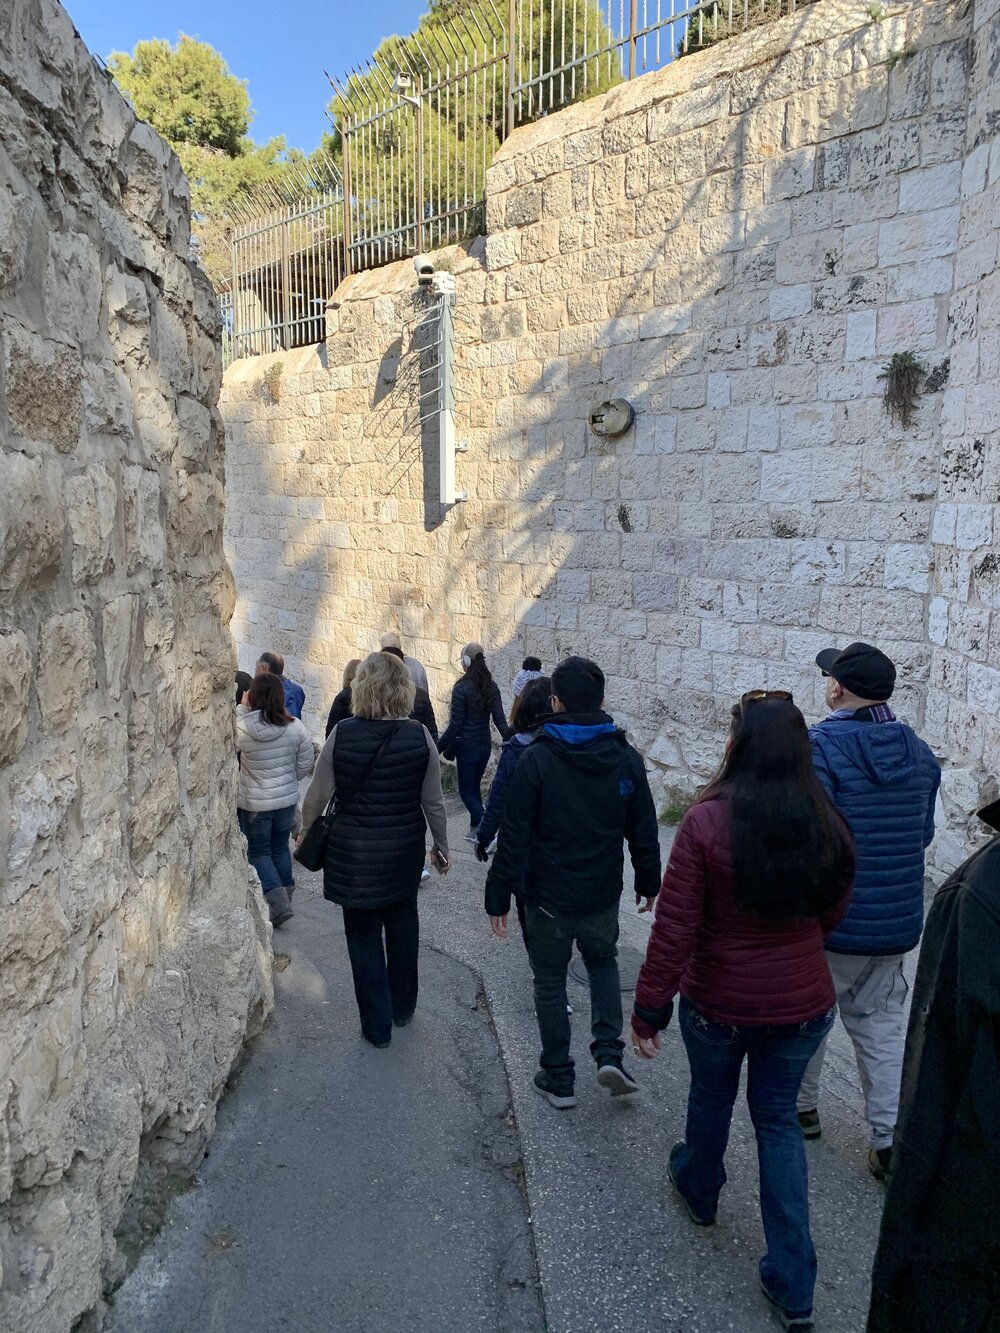 I took this photo on the same road that Jesus rode into Jerusalem on. Picture palms and praise happening on this road, but also note how it had no other options but down through the Kidron Valley and up to the Eastern Gate into the Old City. Our connection path for guests to enter into our church community should be as singular and clear as this.